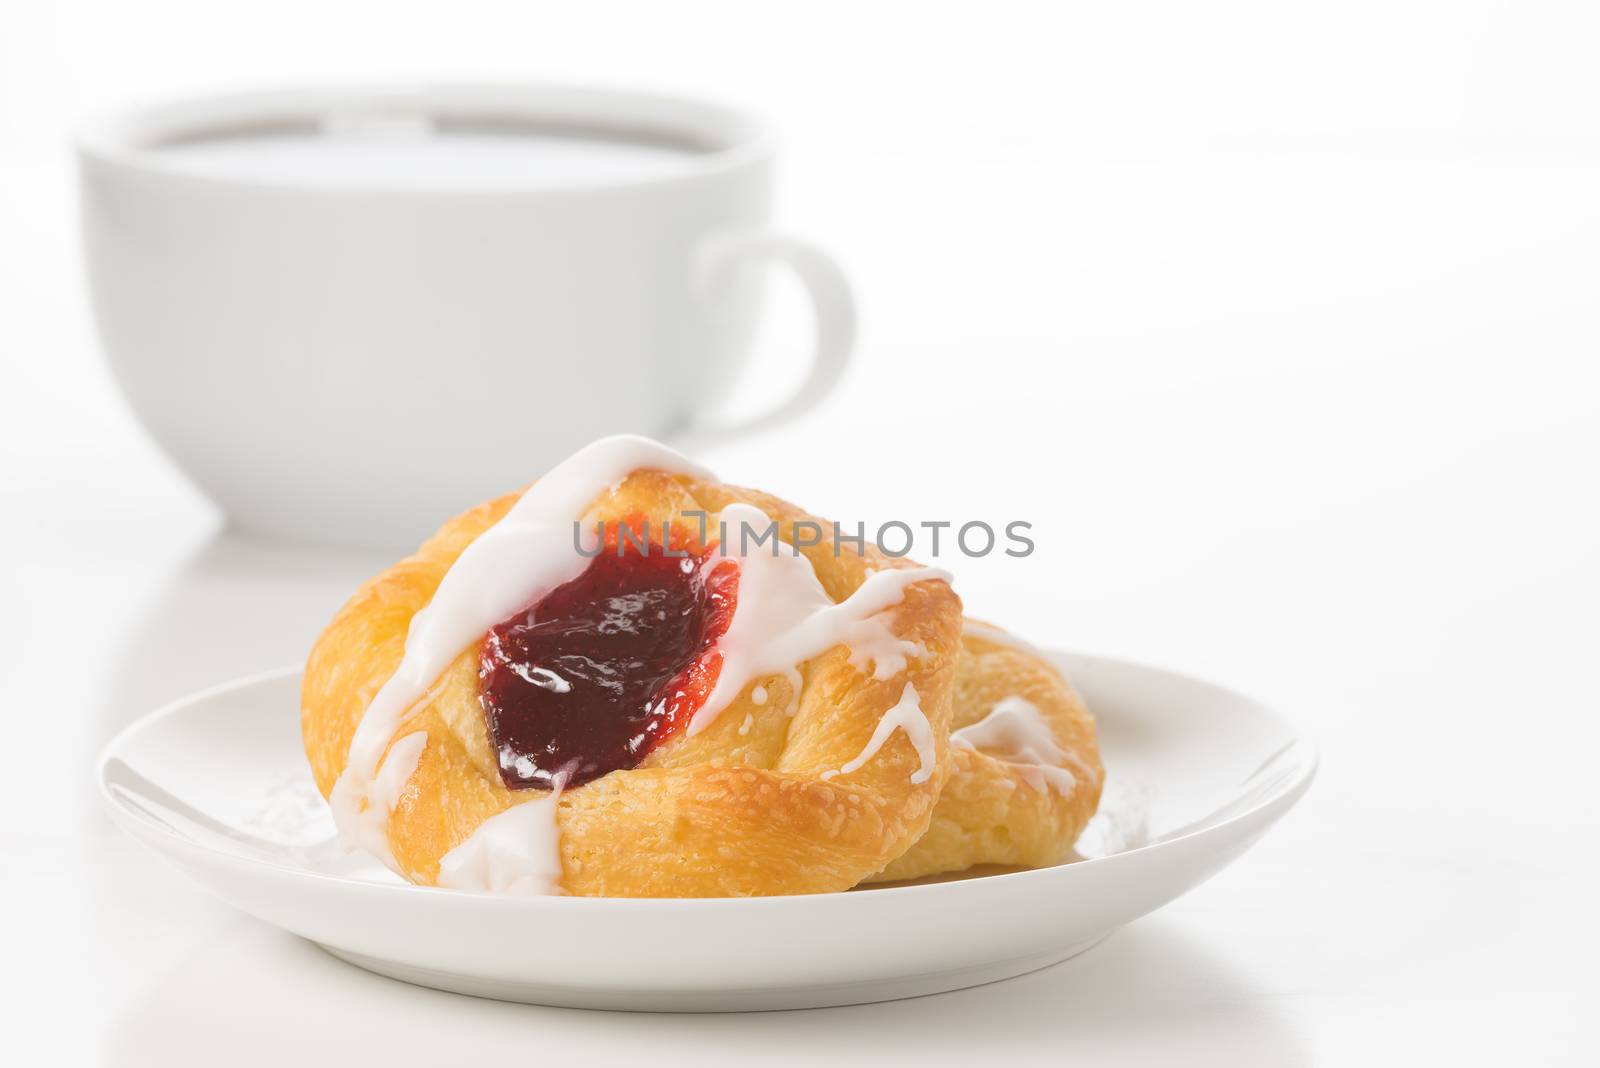 Raspberry Danish and Coffee by billberryphotography